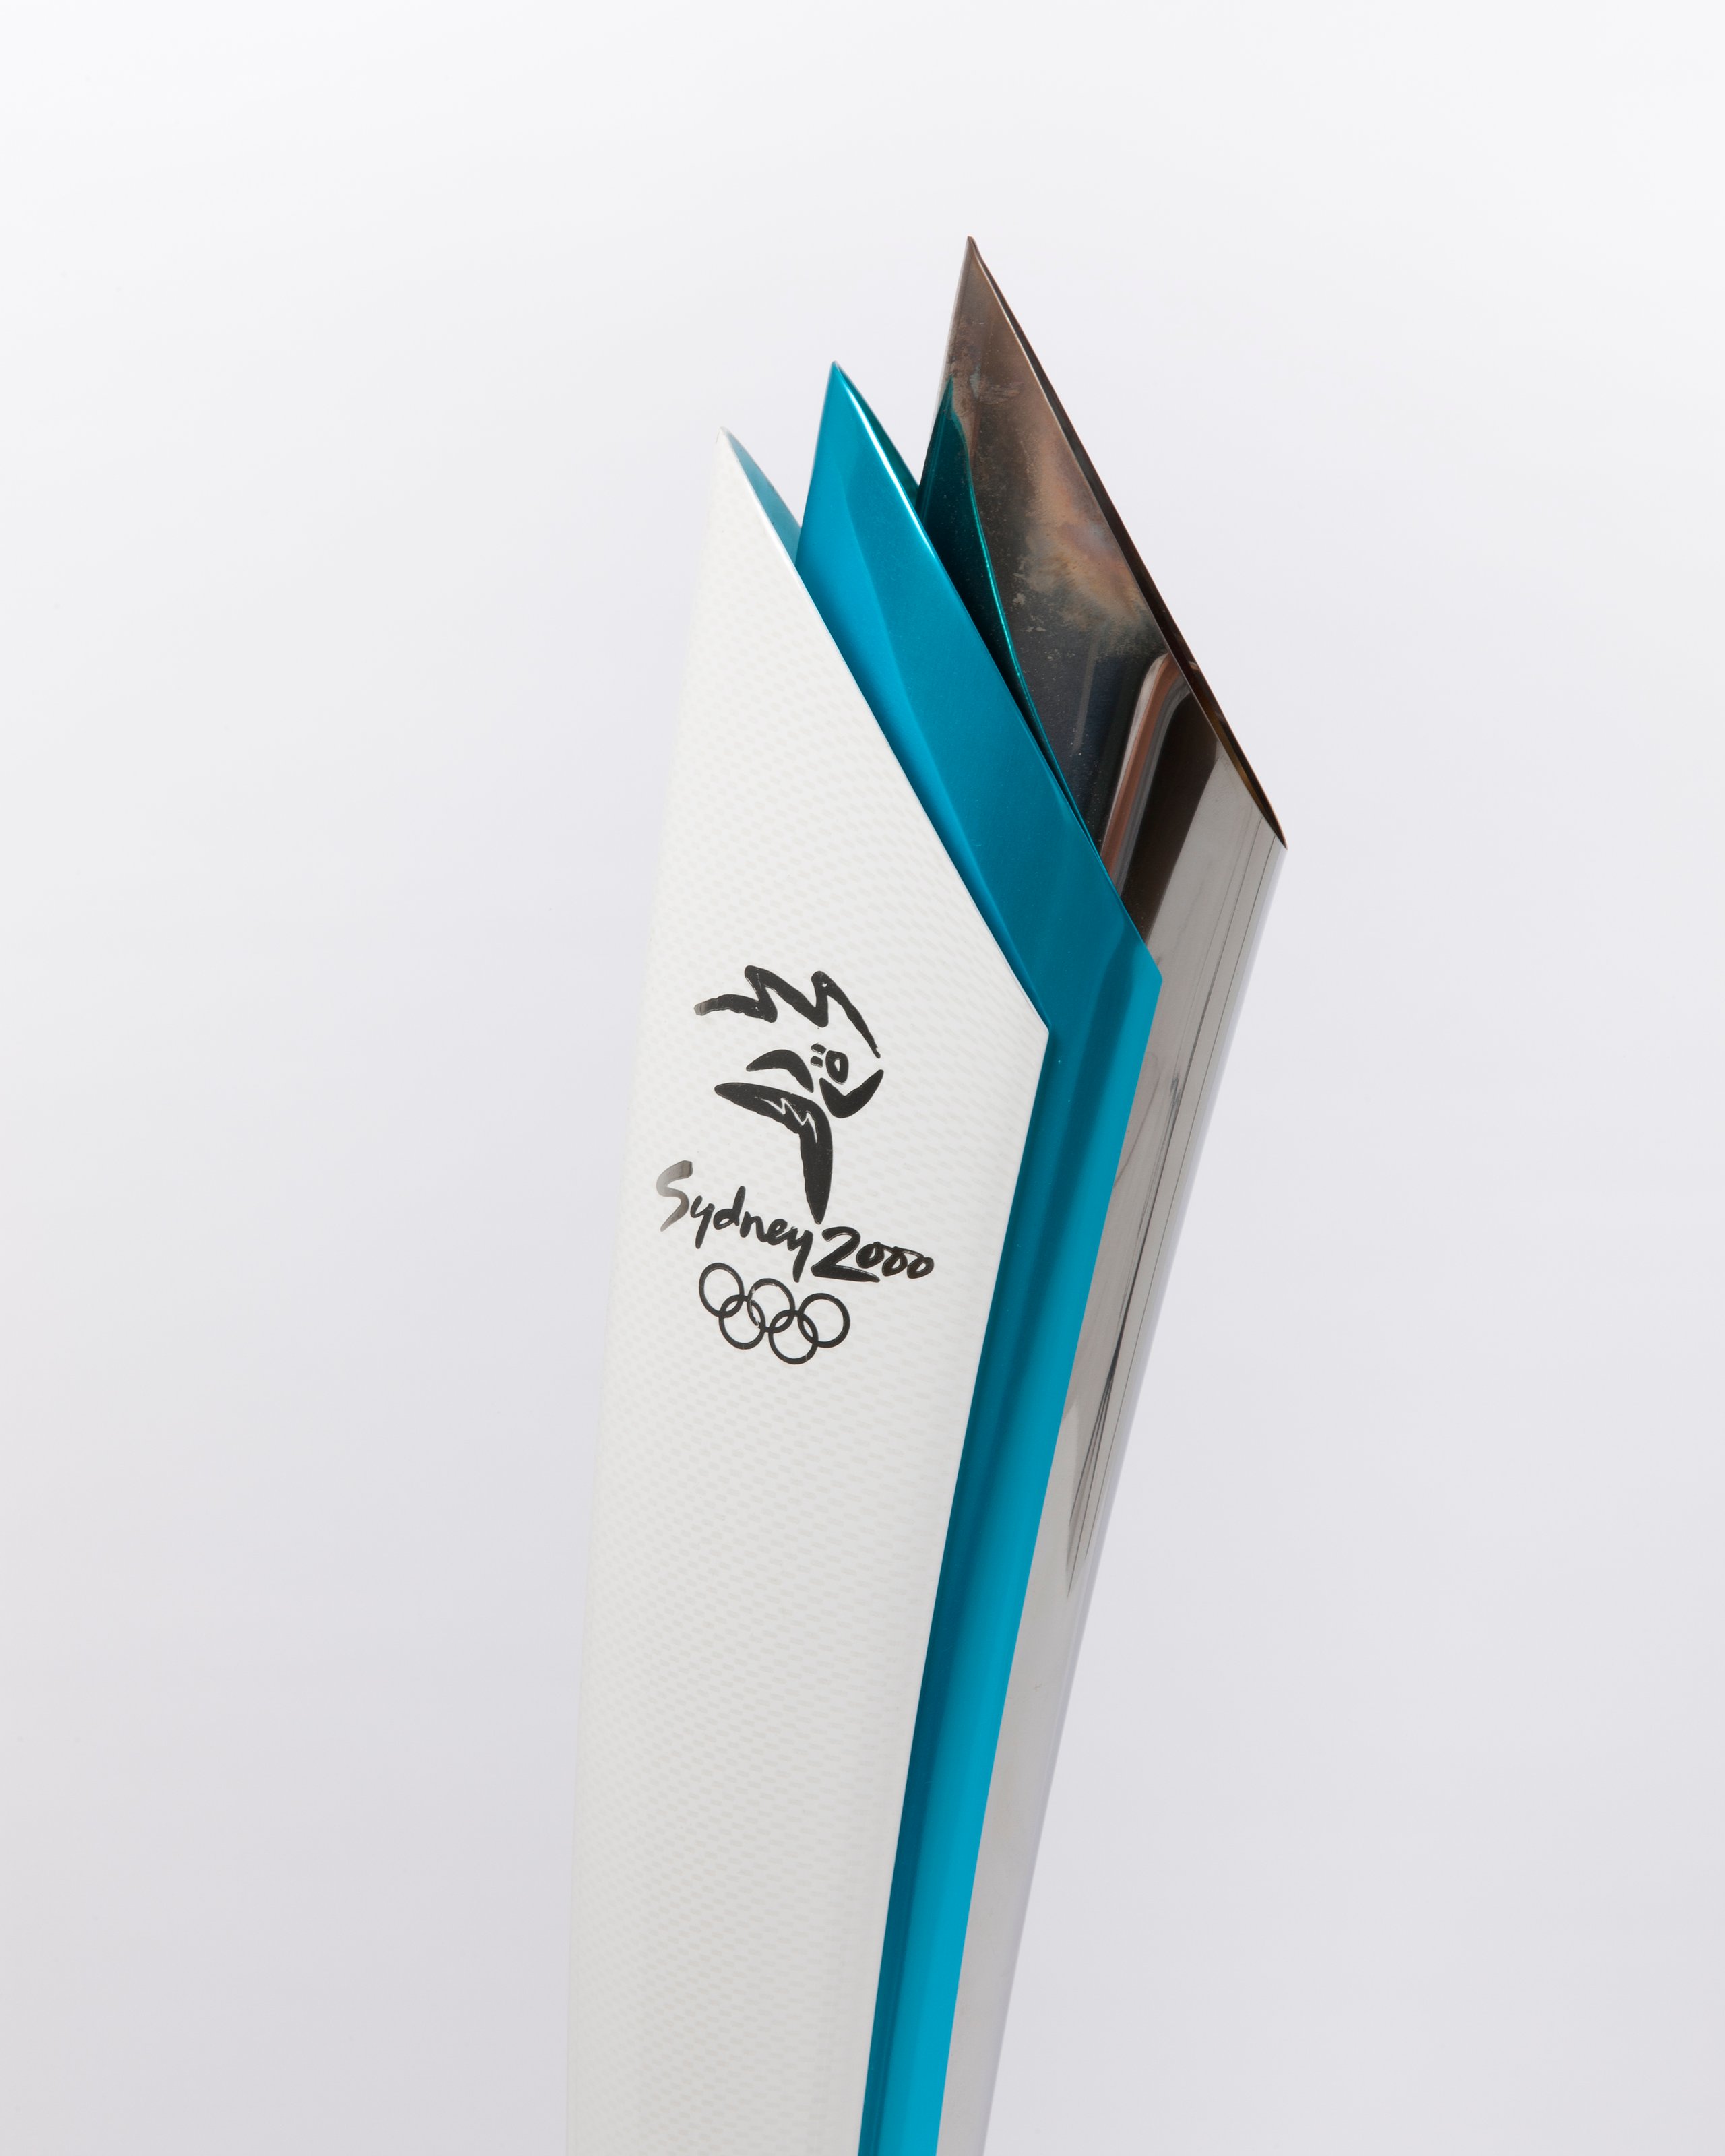 Sydney 2000 Olympic Games torch used by Cathy Freeman